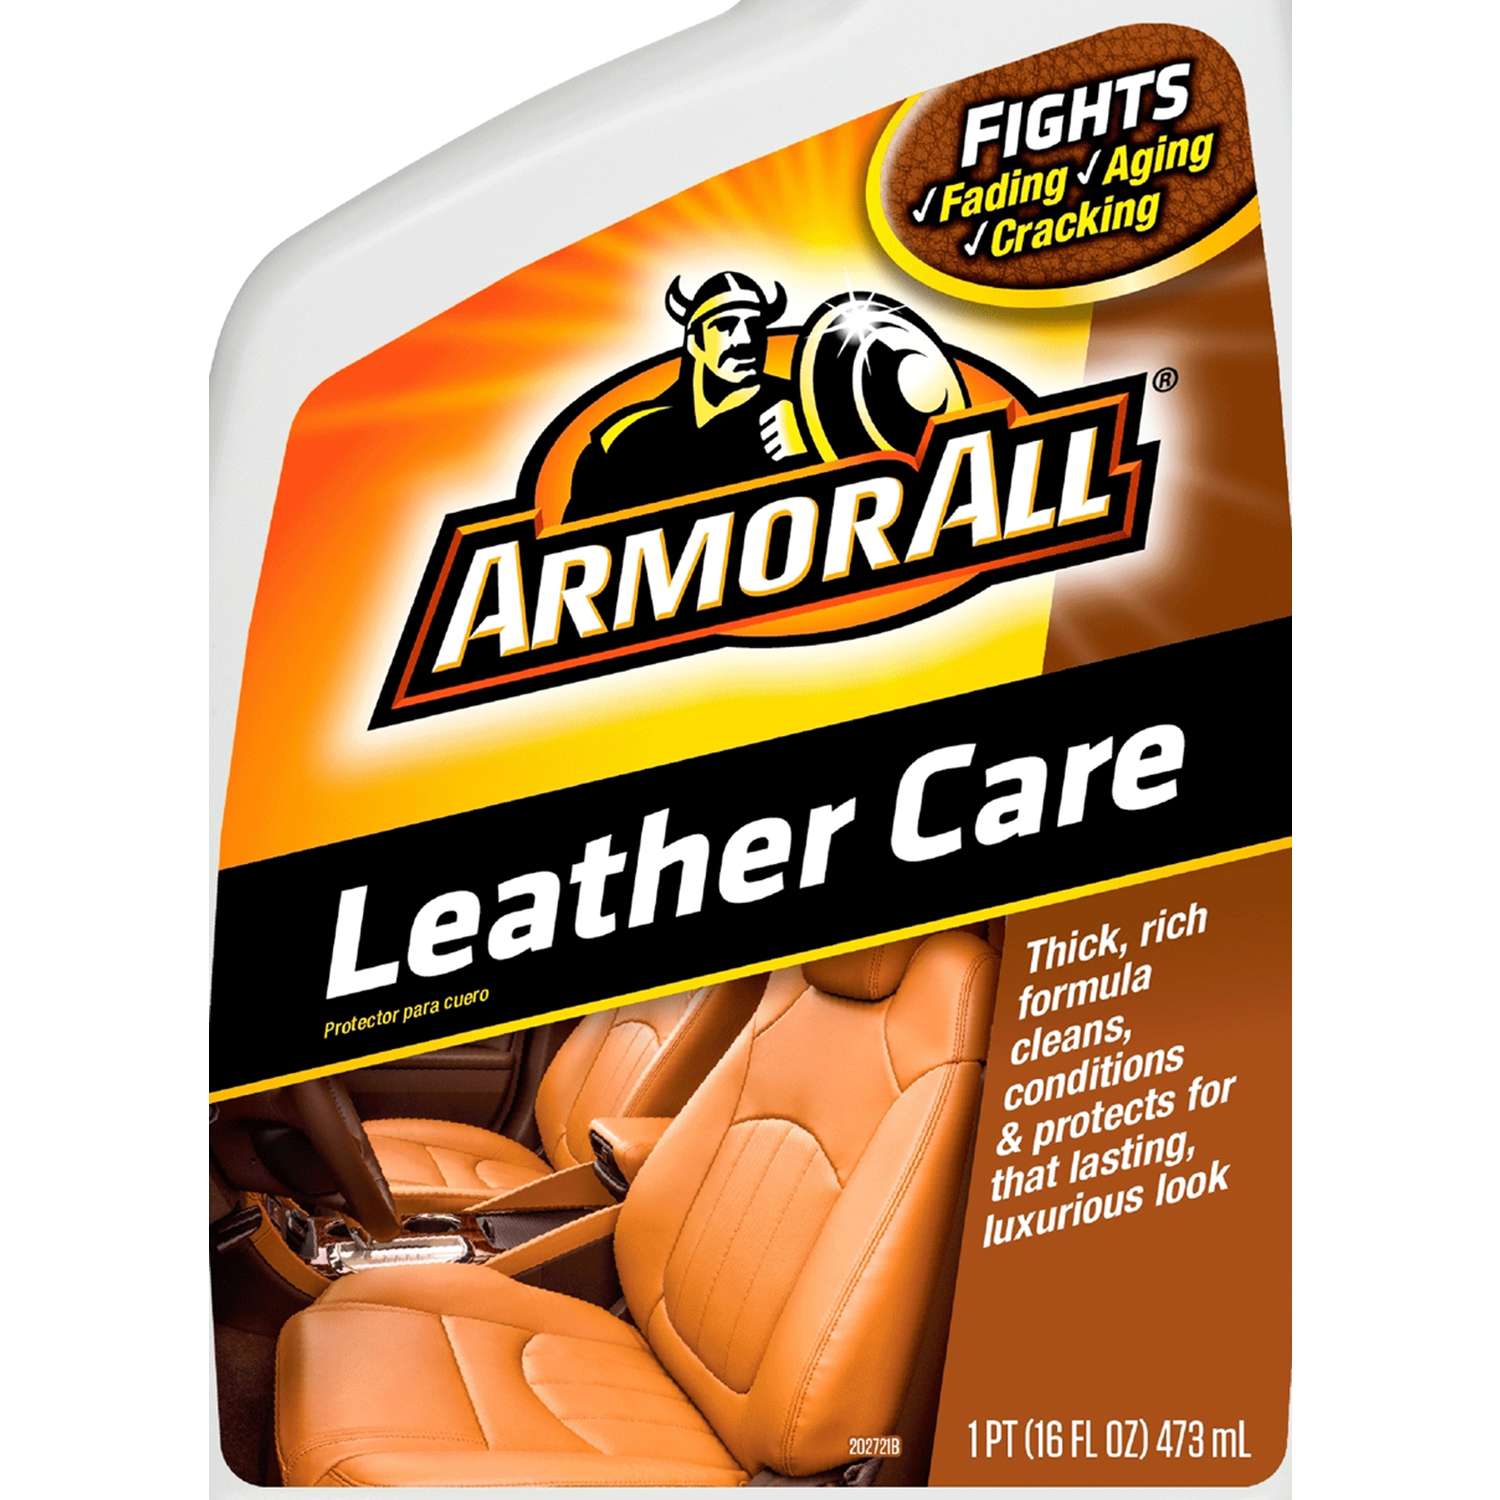 Armor All Car Leather Care Spray by Armor All, Leather Cleaner and  Protectant for Cars, Trucks and Motorcycles, Includes 2 Bottles, 16 Fl Oz  Each